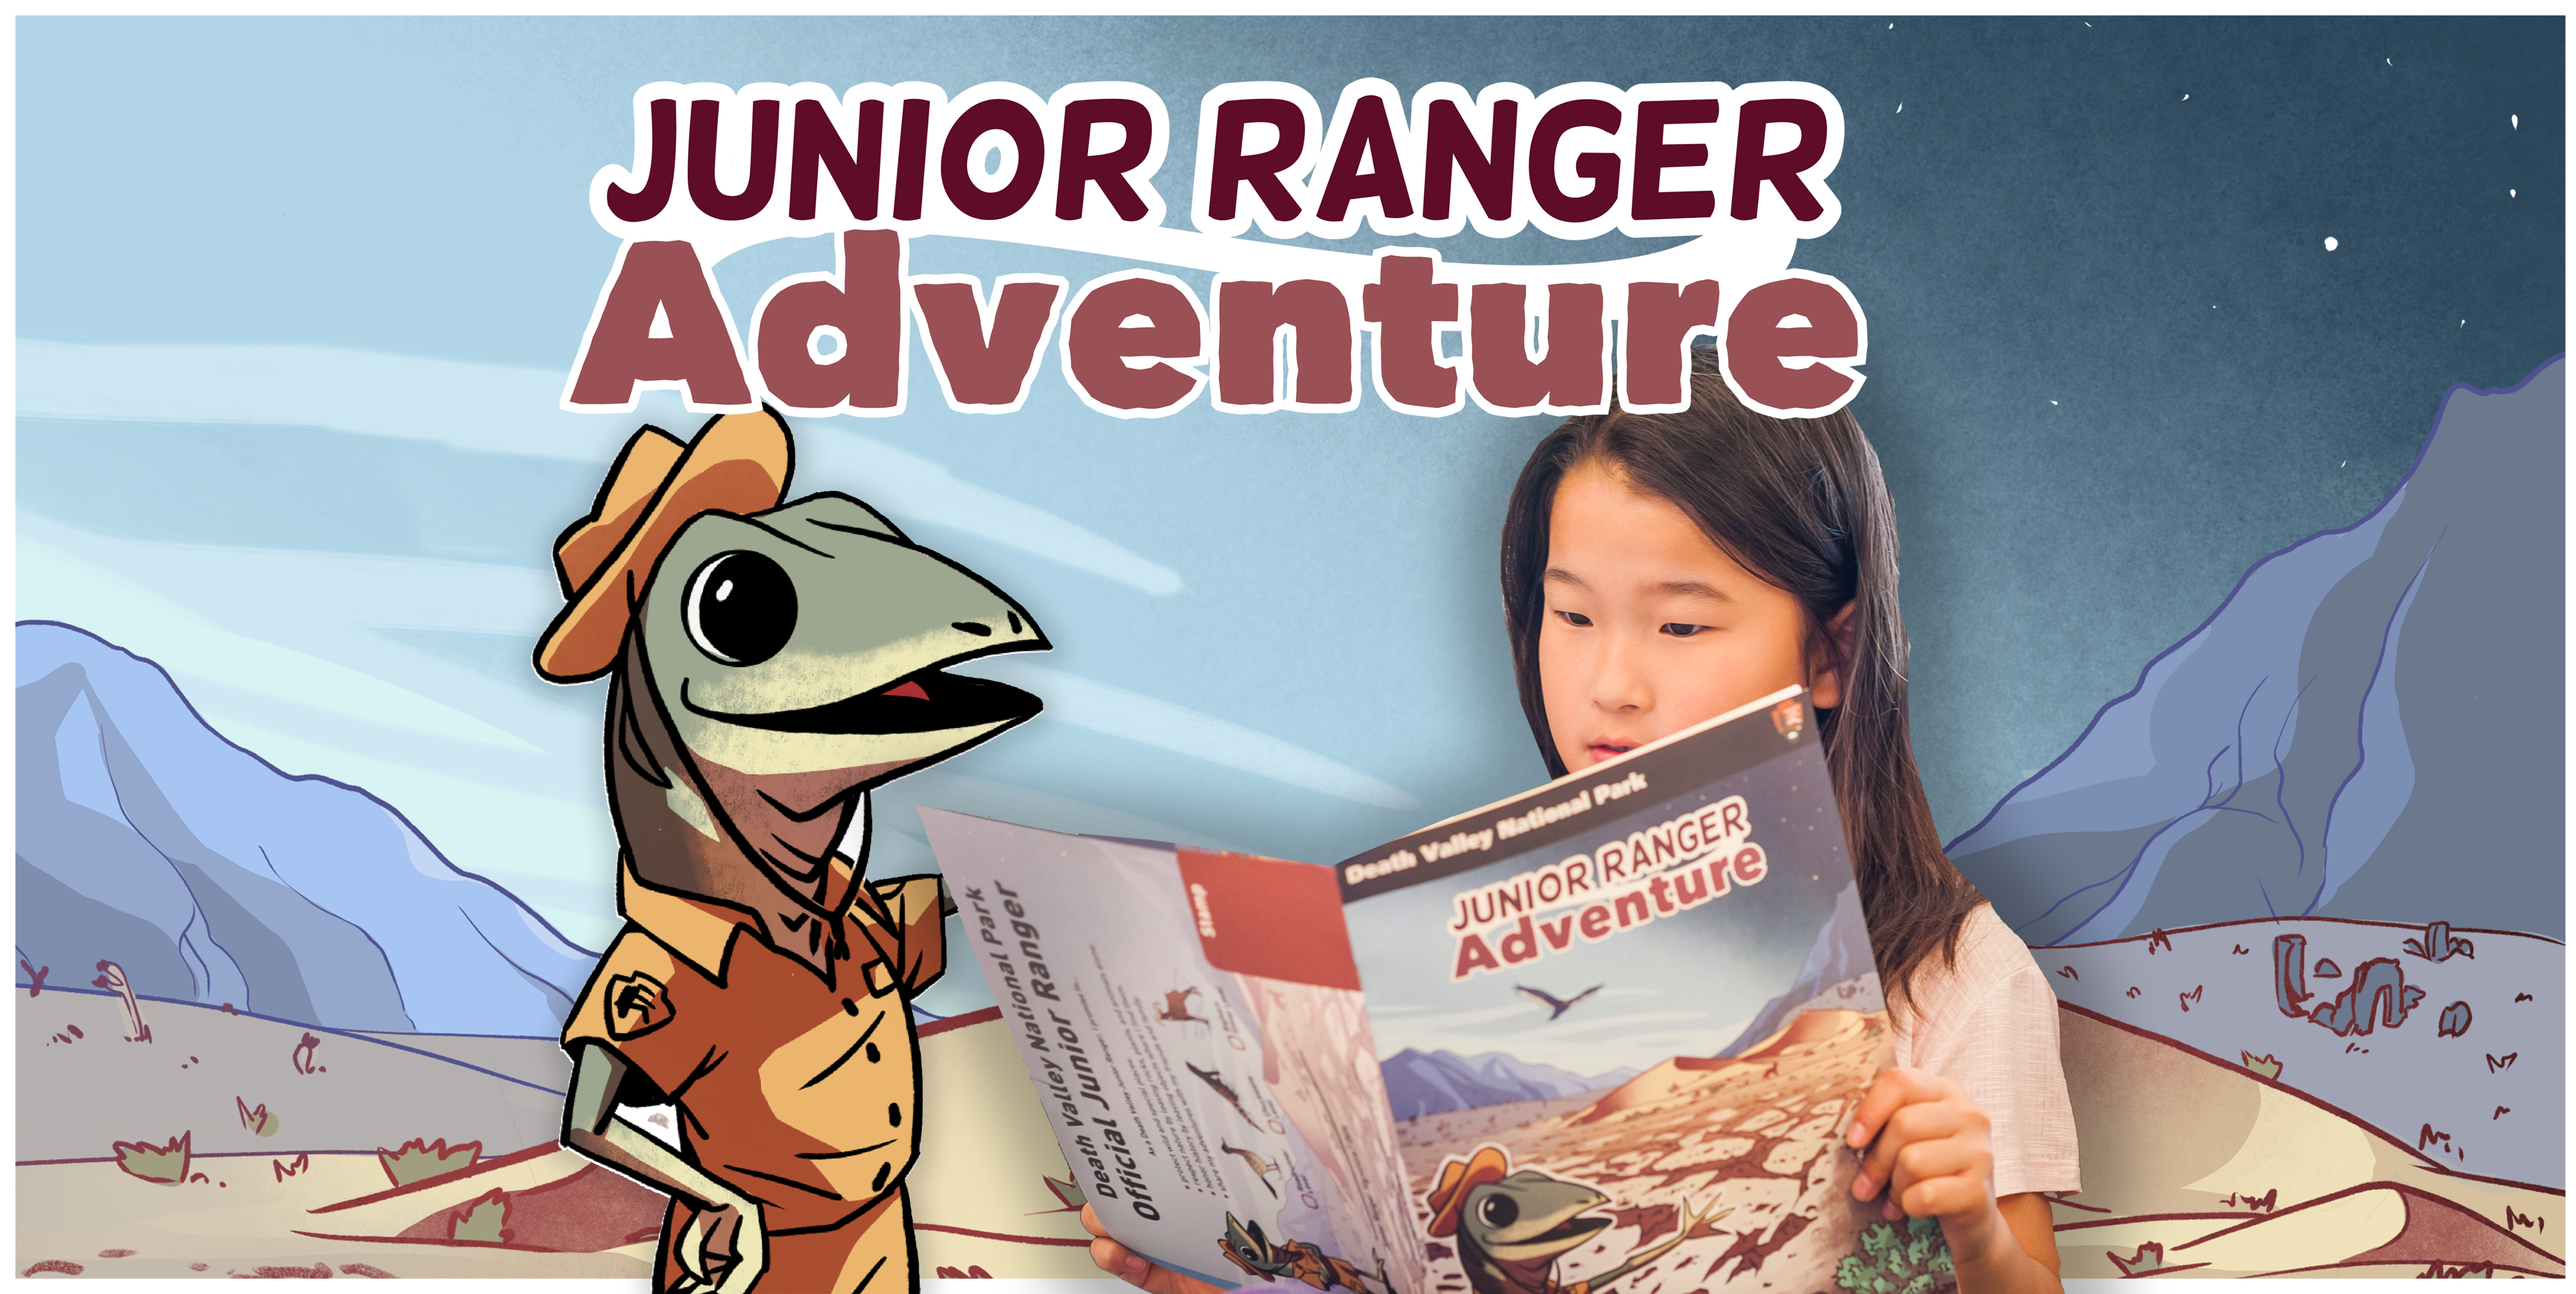 A cartoon lizard and a photo of a young child looking at a Junior Ranger book